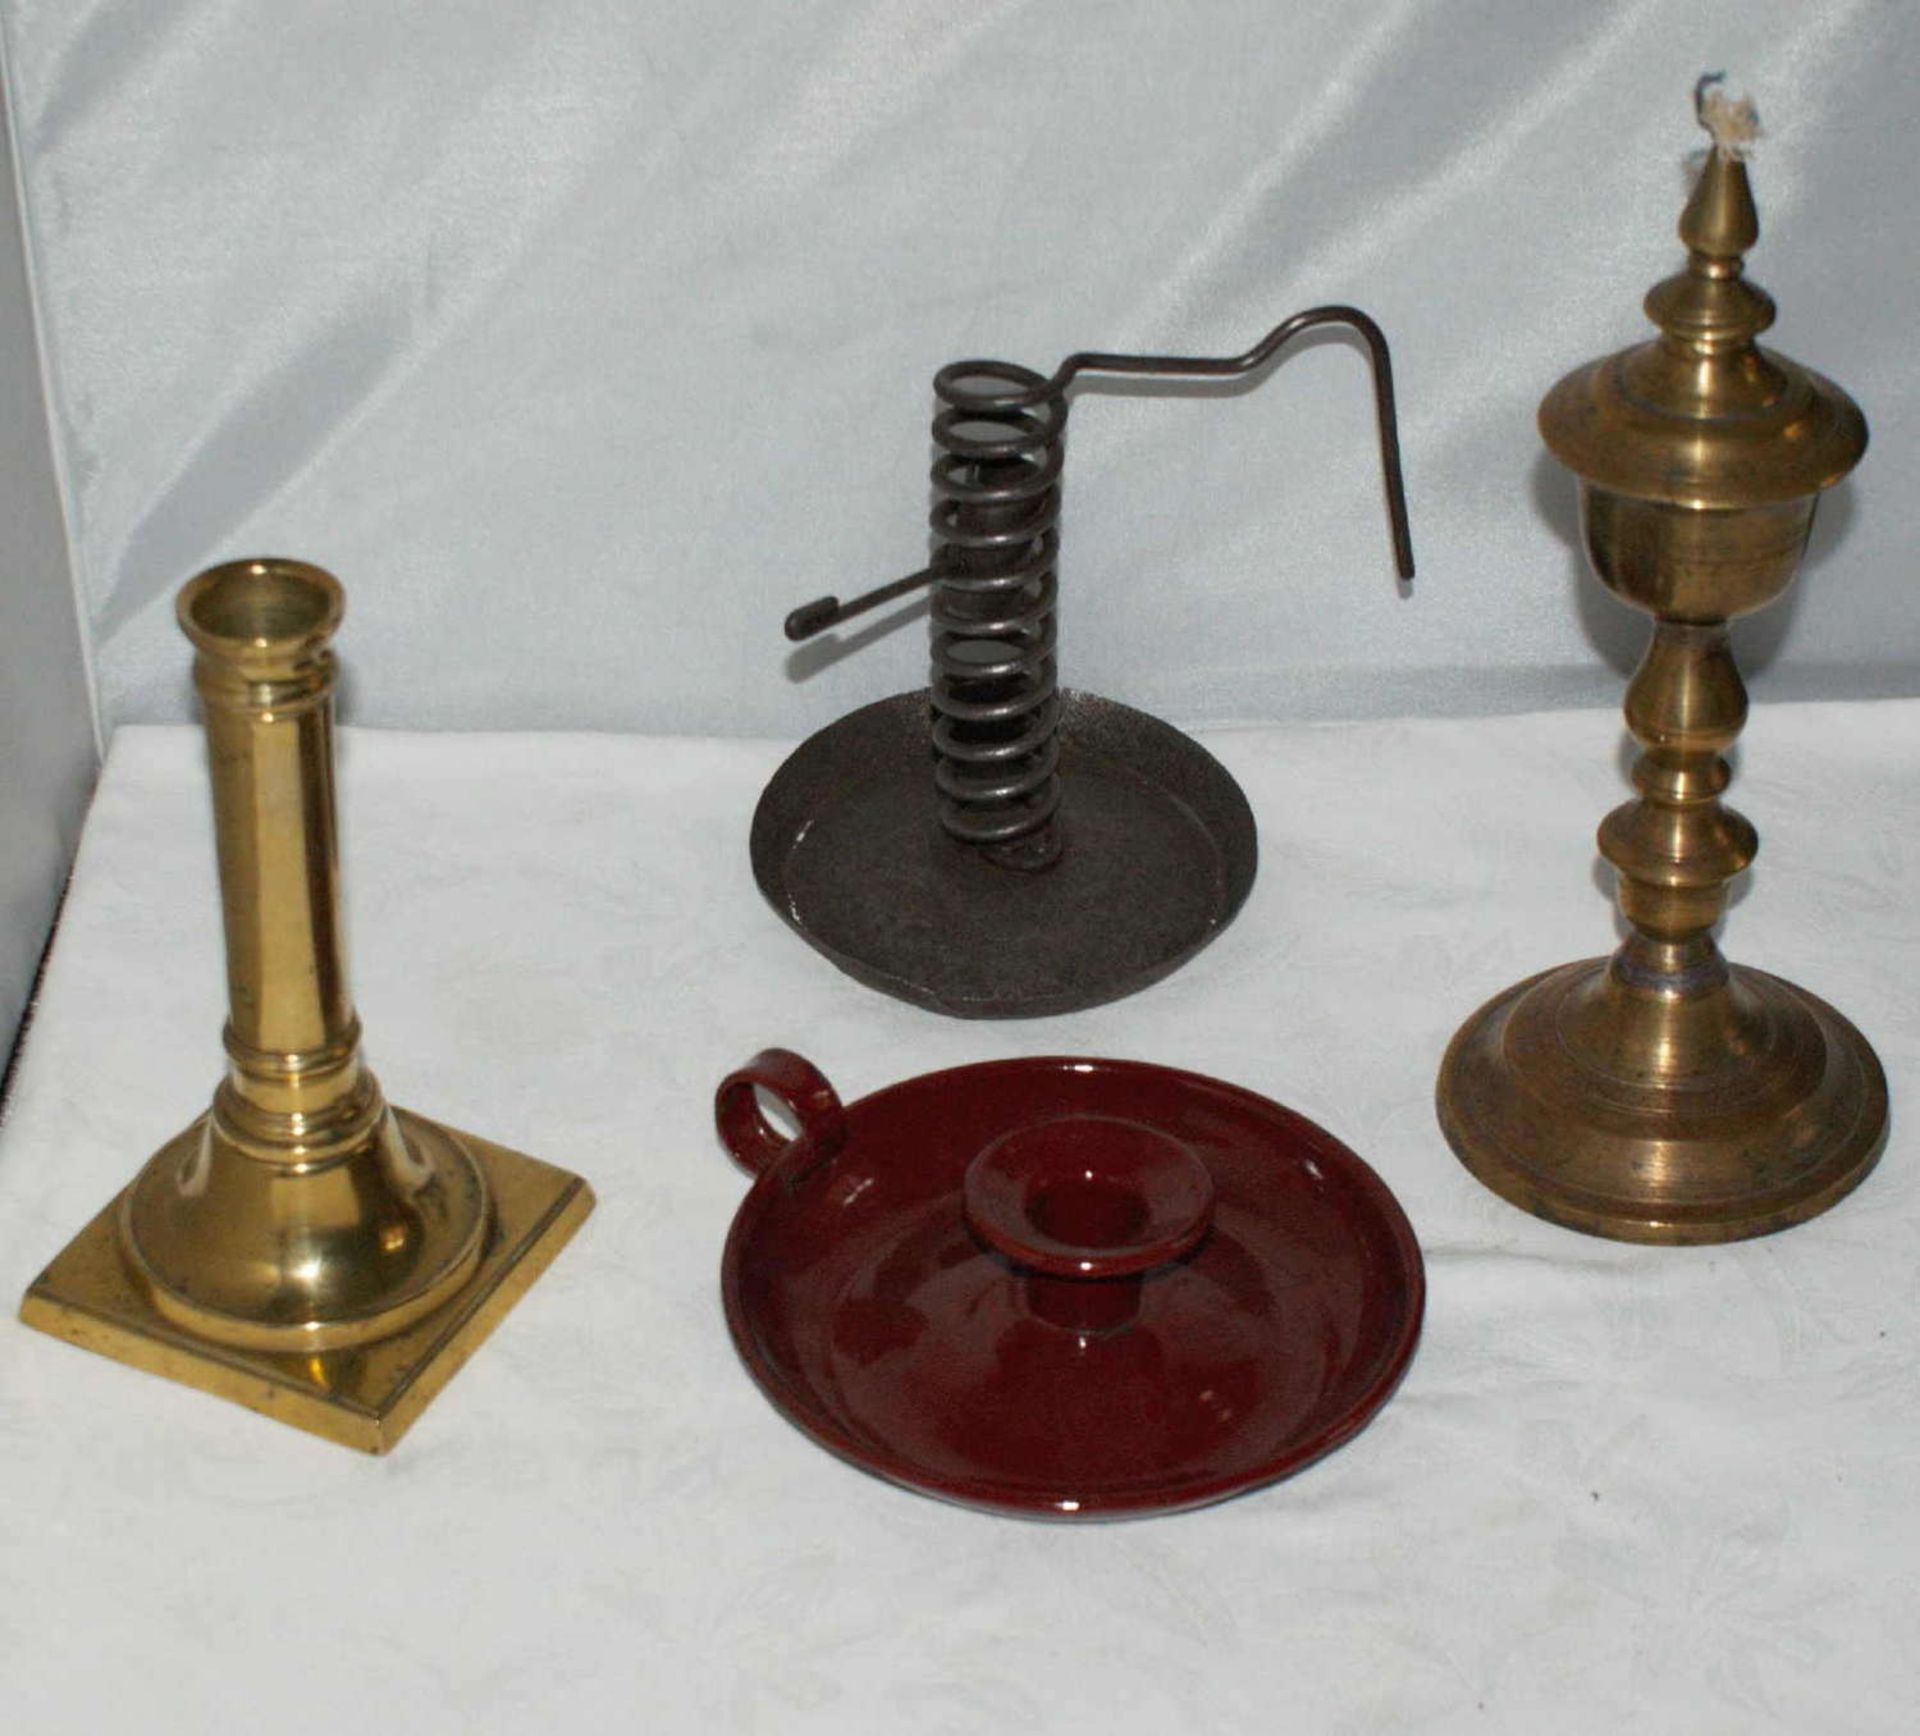 Lot candlestick, while enamel, metal with lathes, etc. Interesting lot.